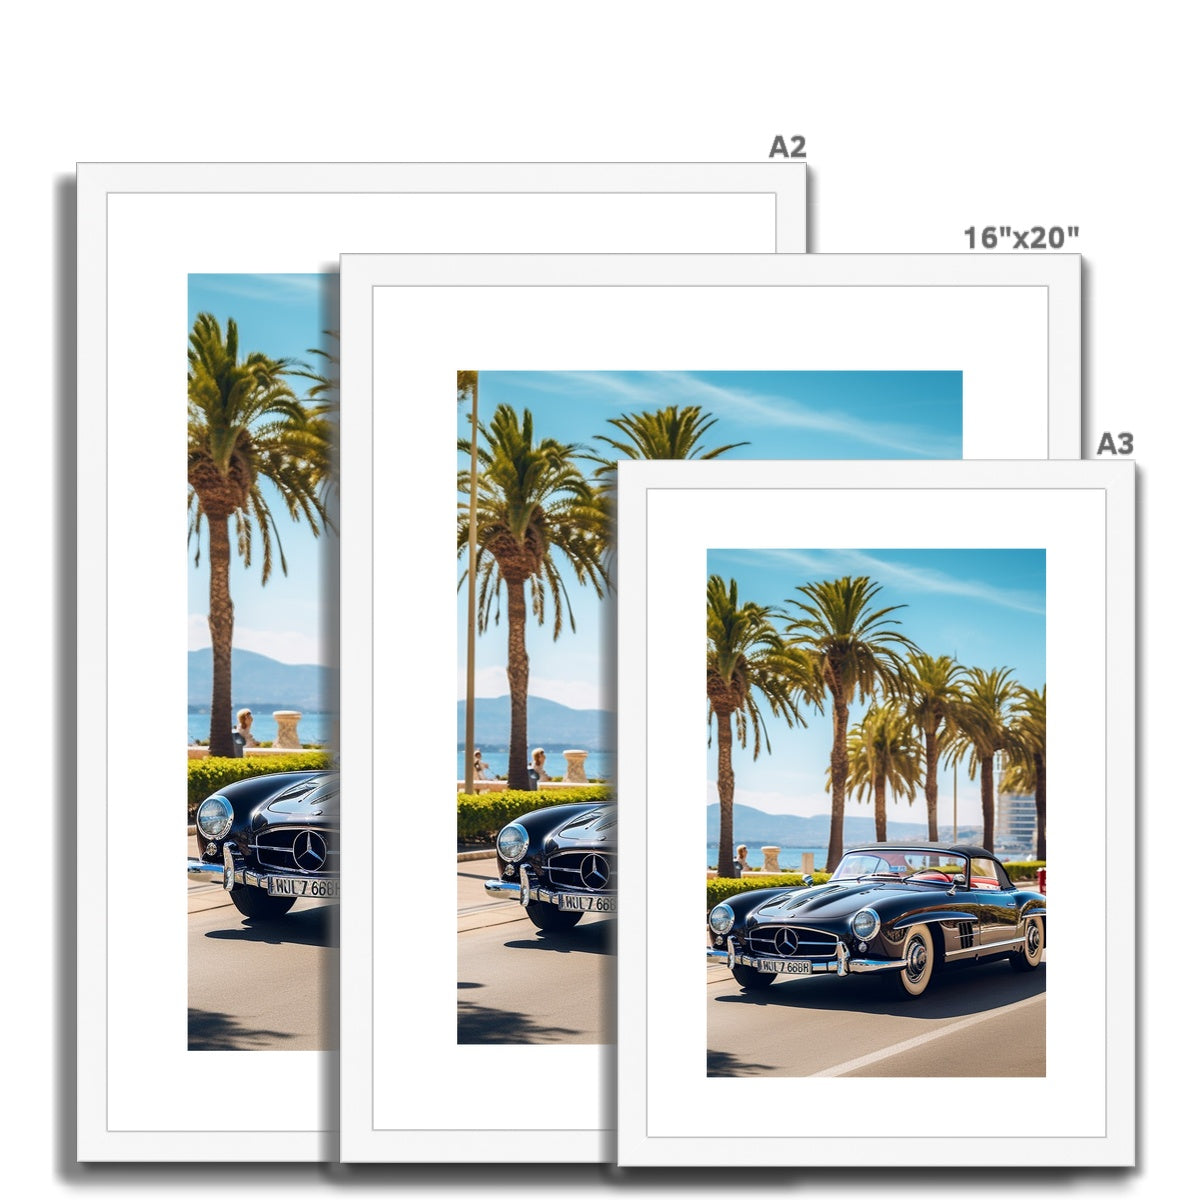 Retro Mercedes, Cruising in Cannes, South of France Summers Framed & Mounted Print